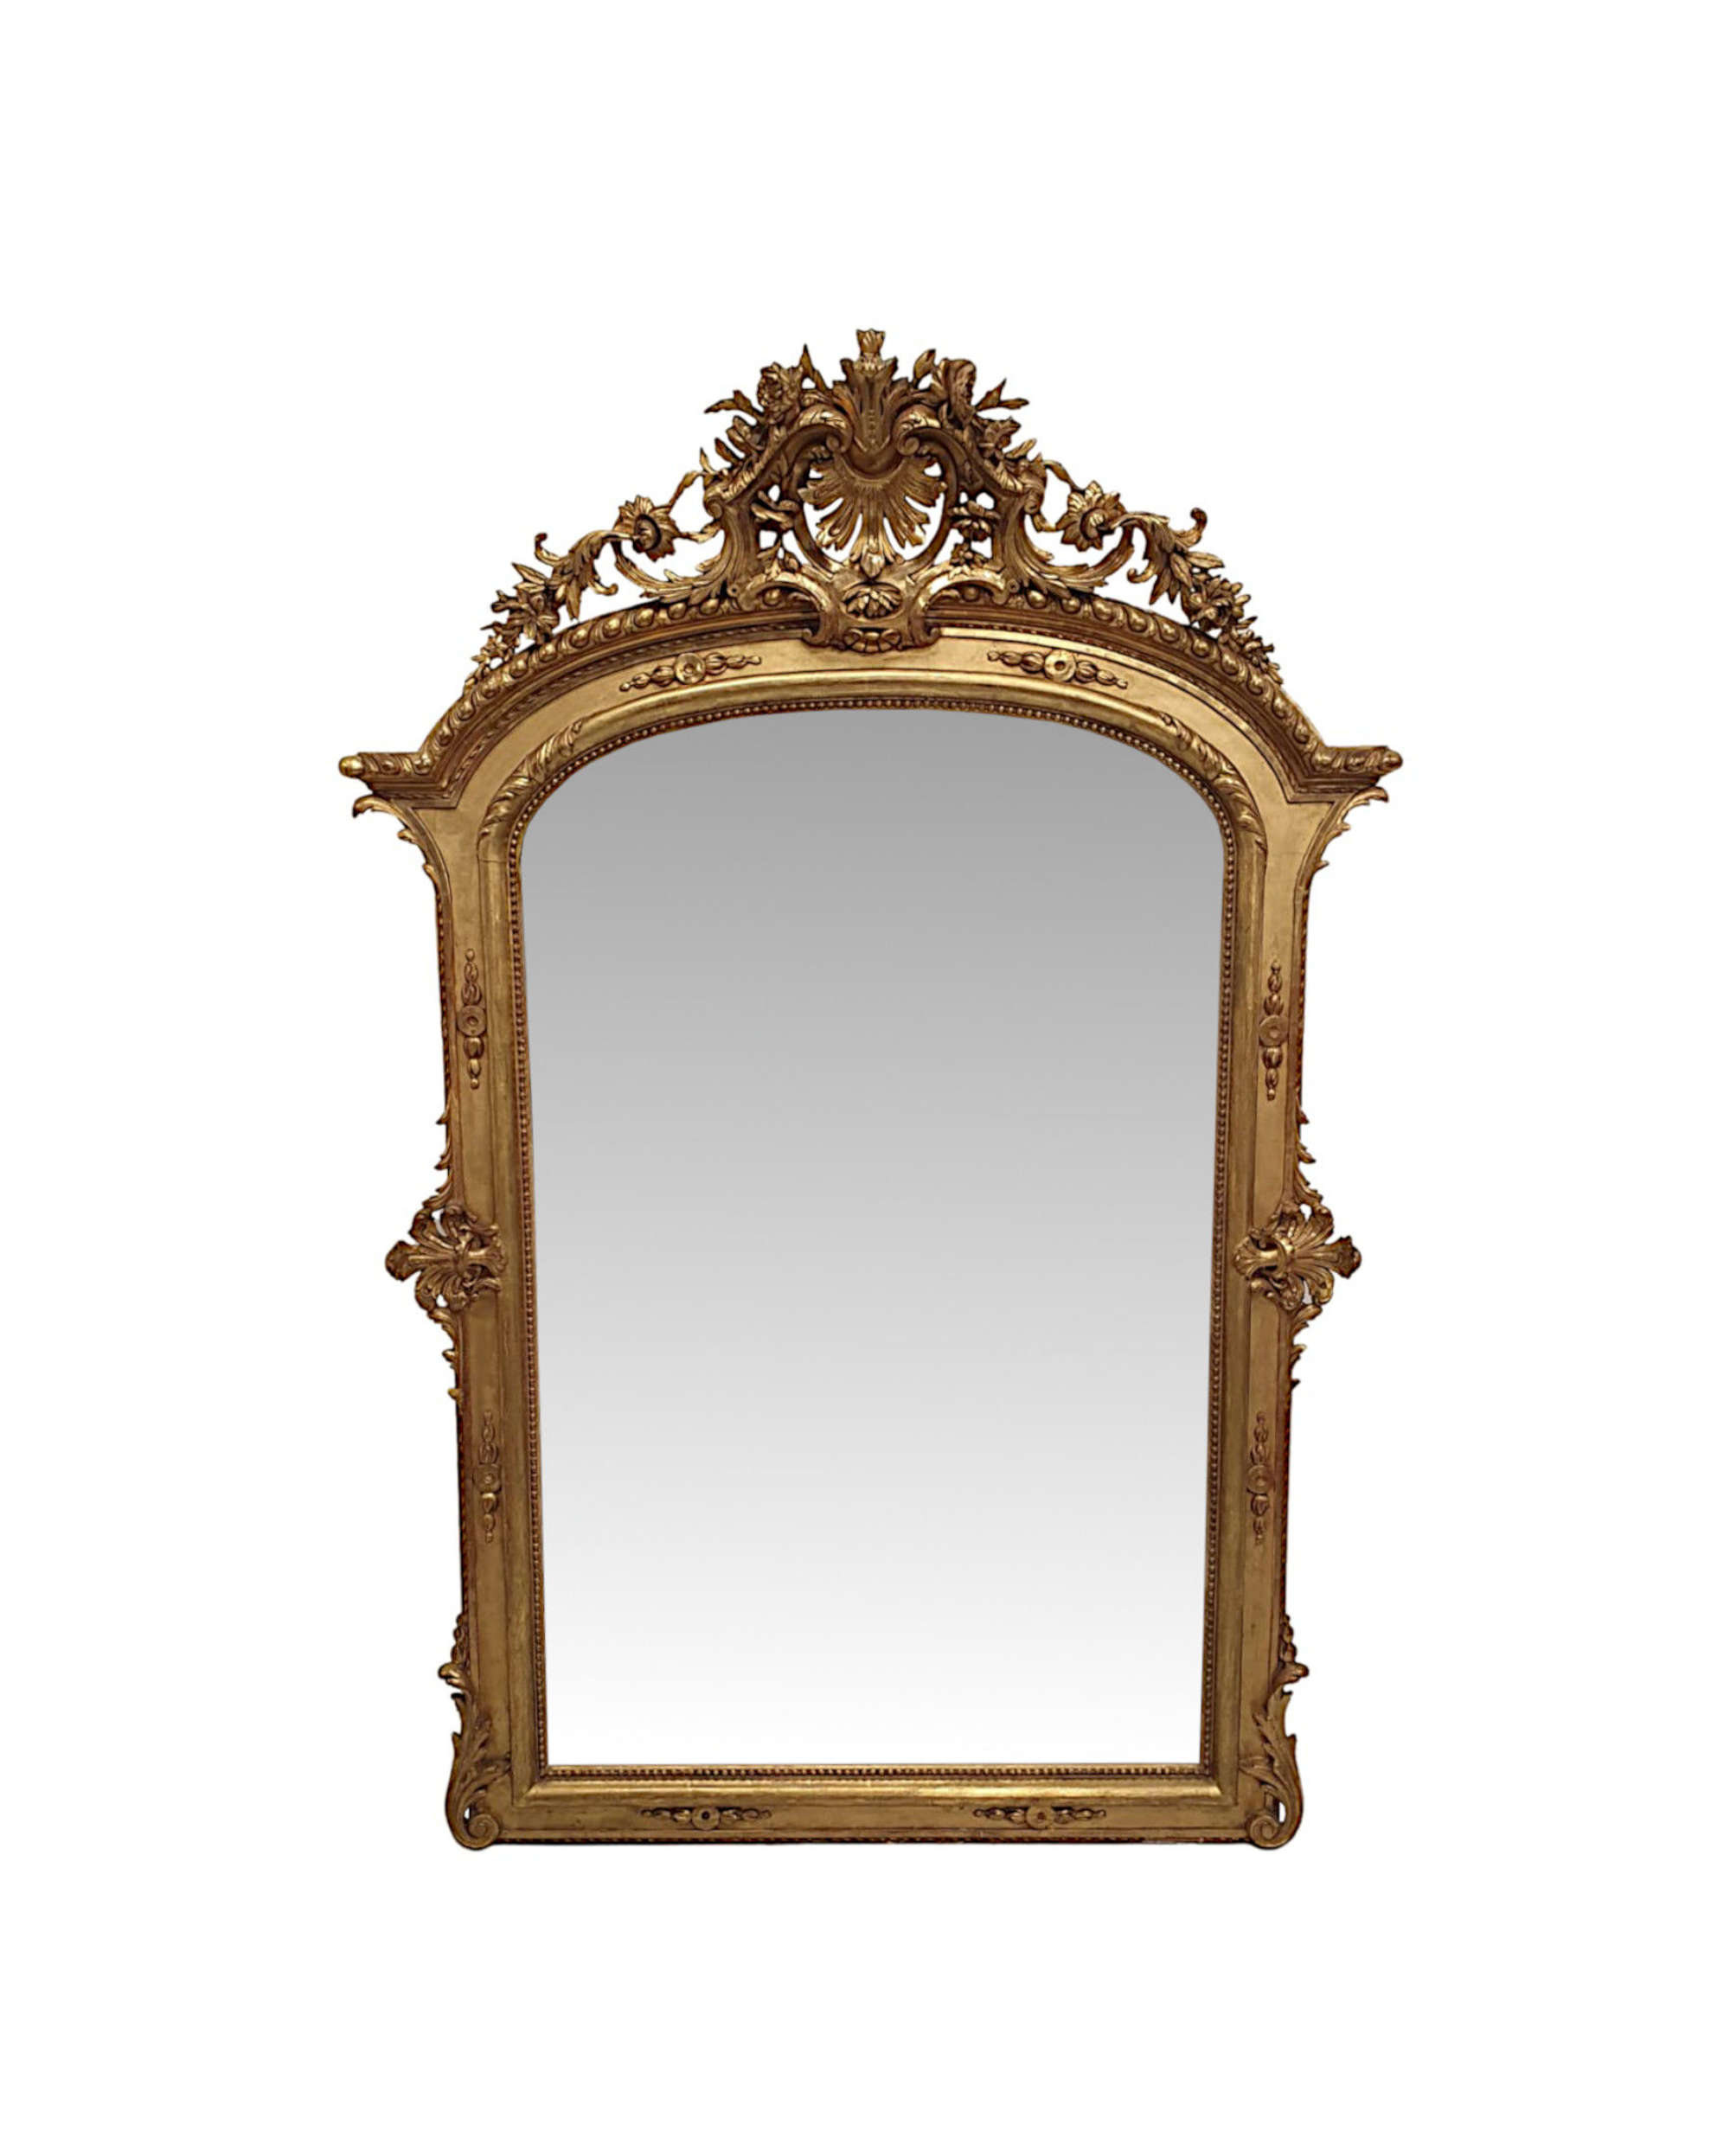 A Very Fine Large 19th Century Giltwood Overmantel Or Hall Antique Mirror